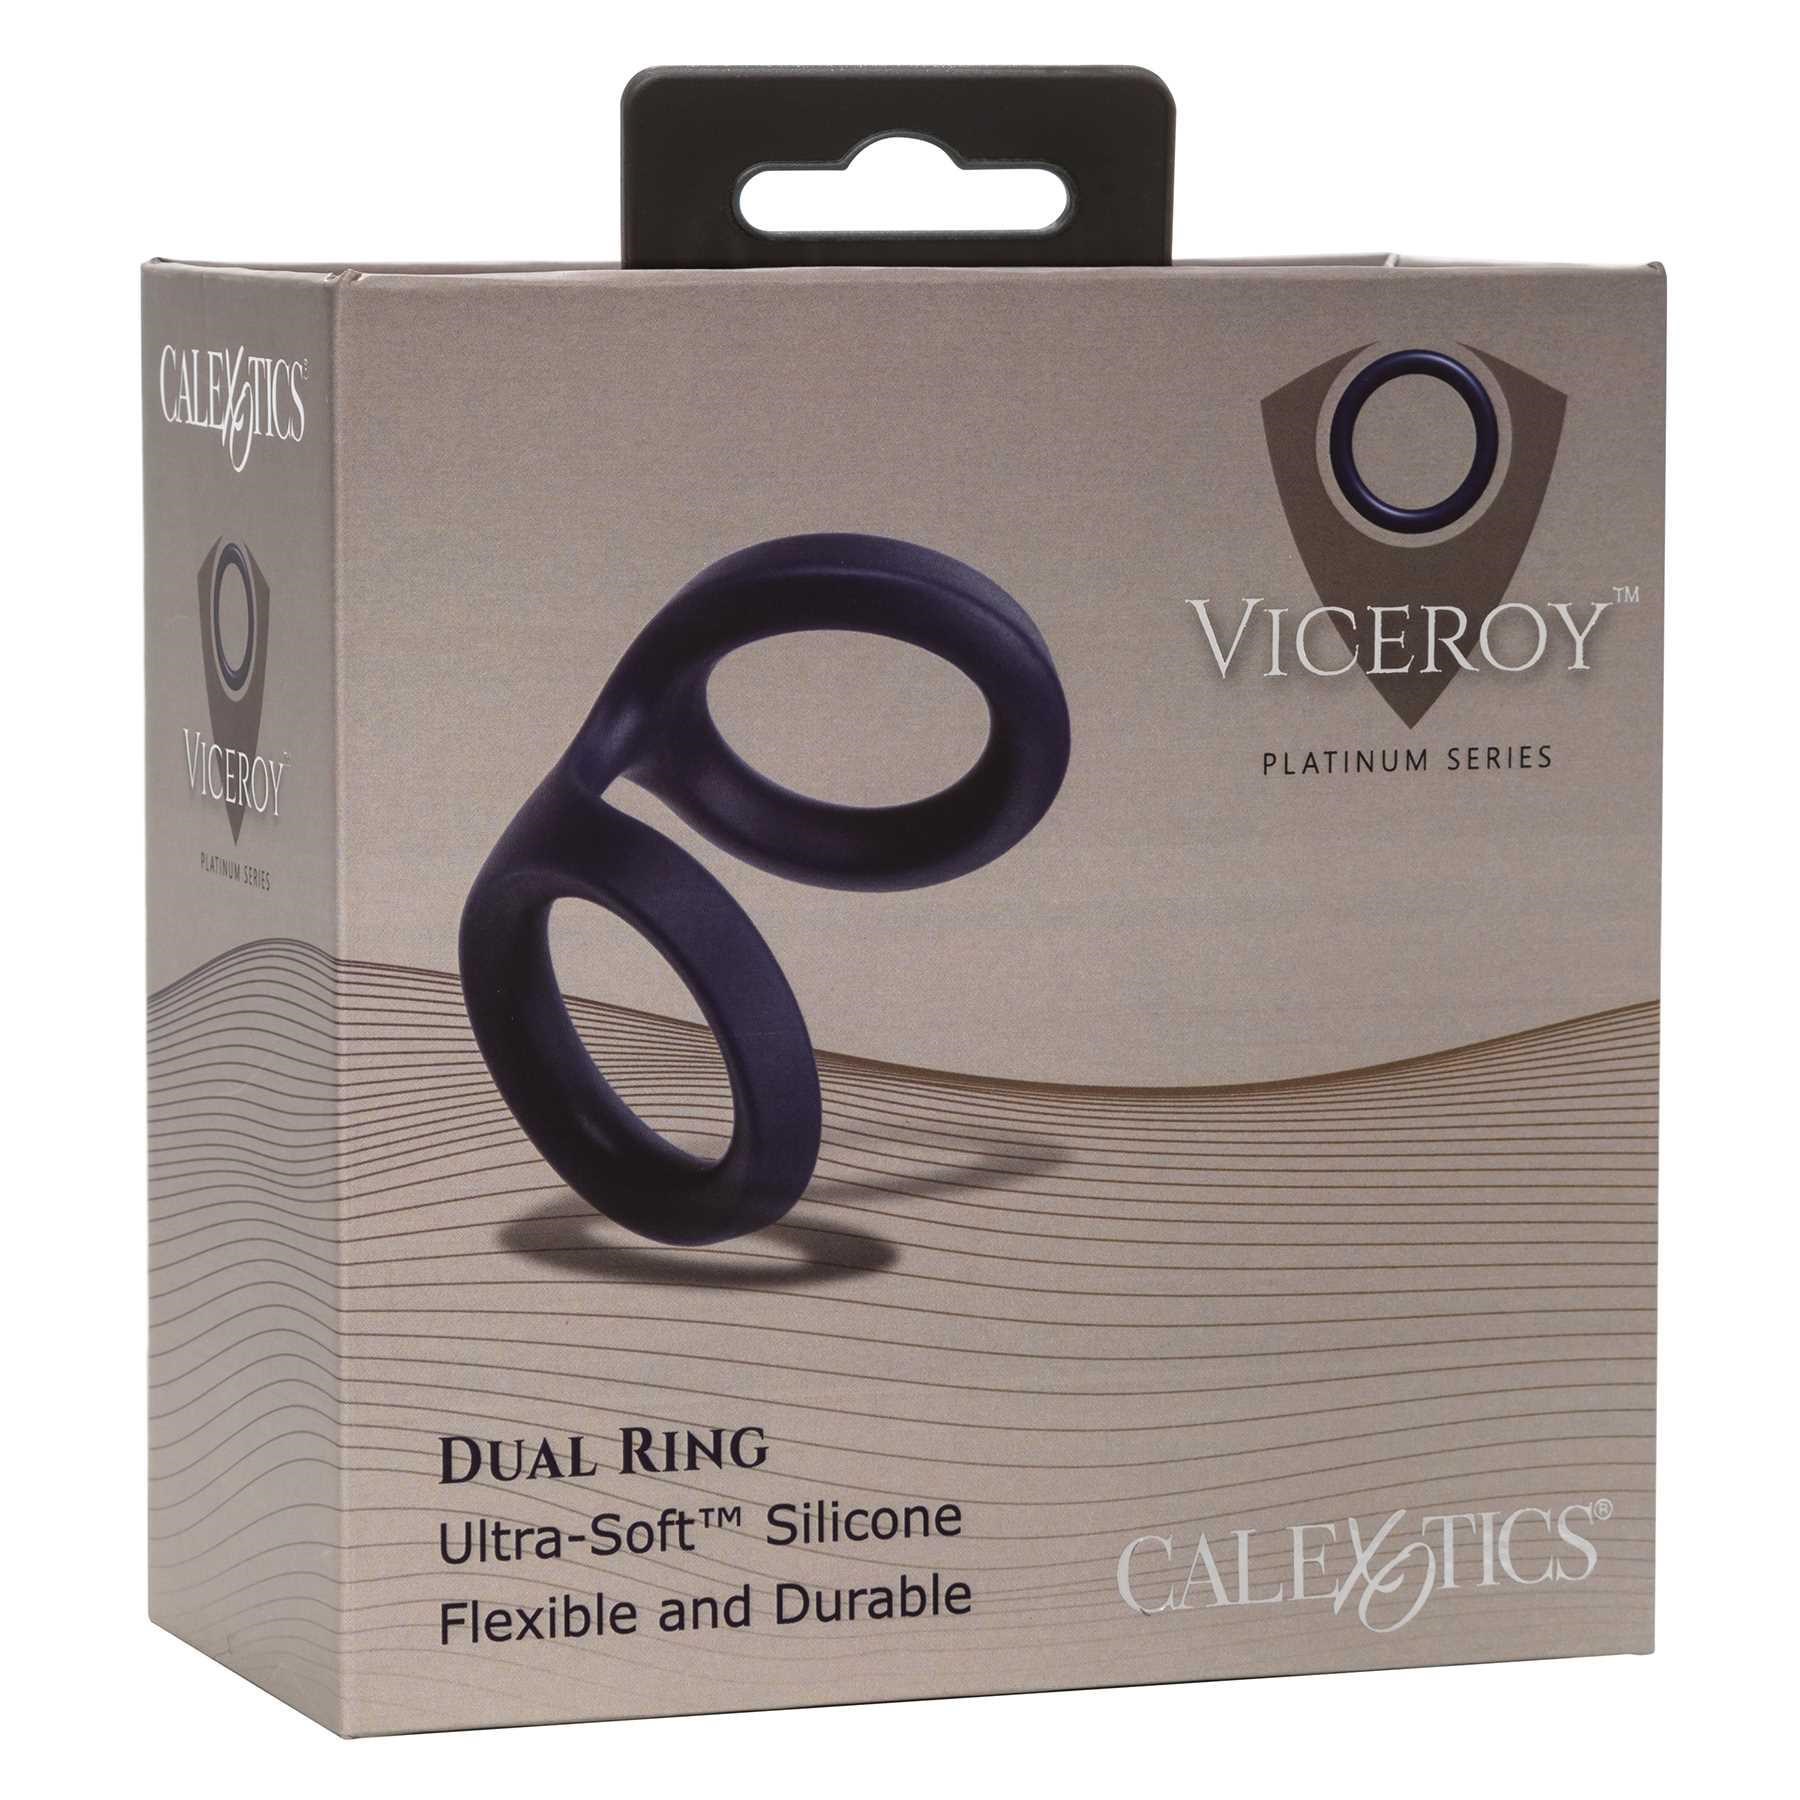 Viceroy Dual Ring front of box